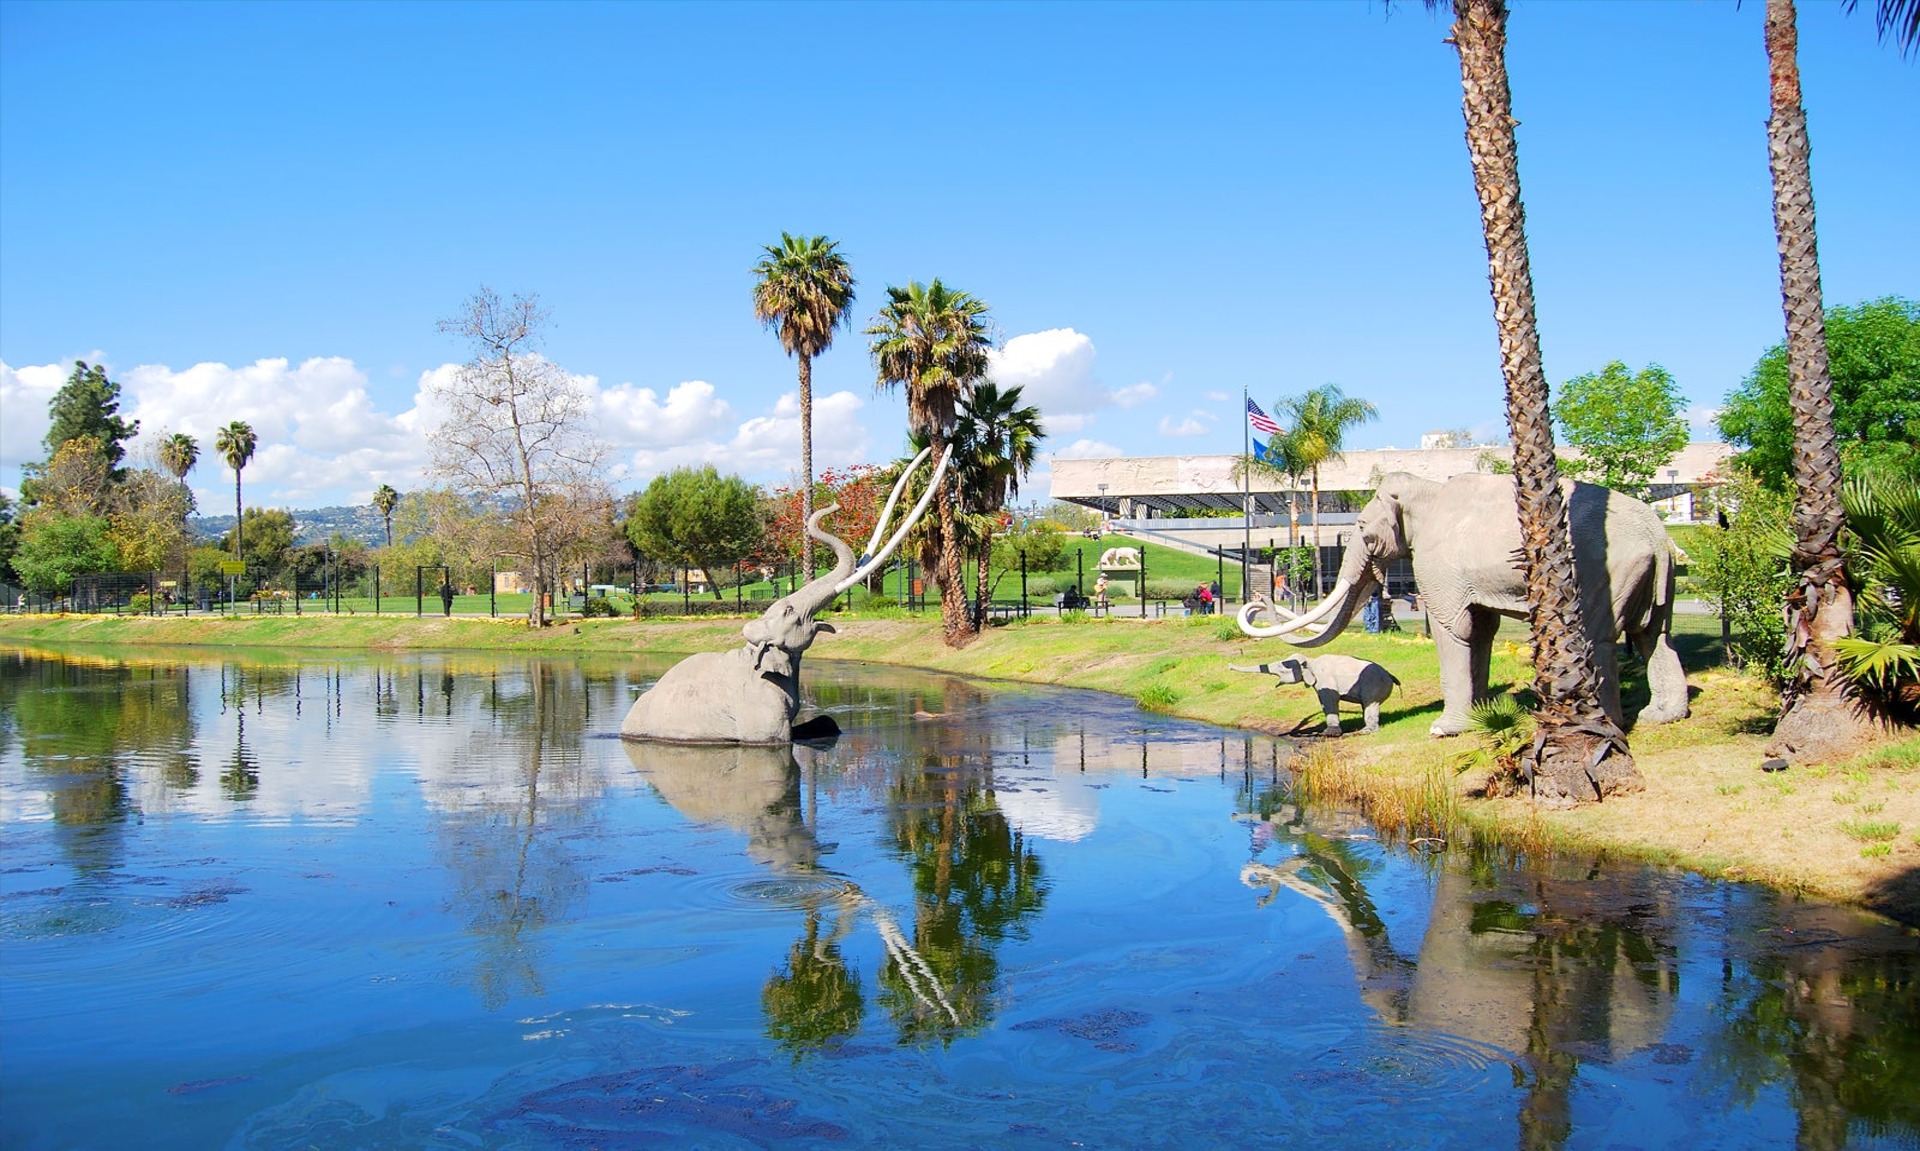 How to Make the Most of Your Visit to Los Angeles’ La Brea Tar Pits